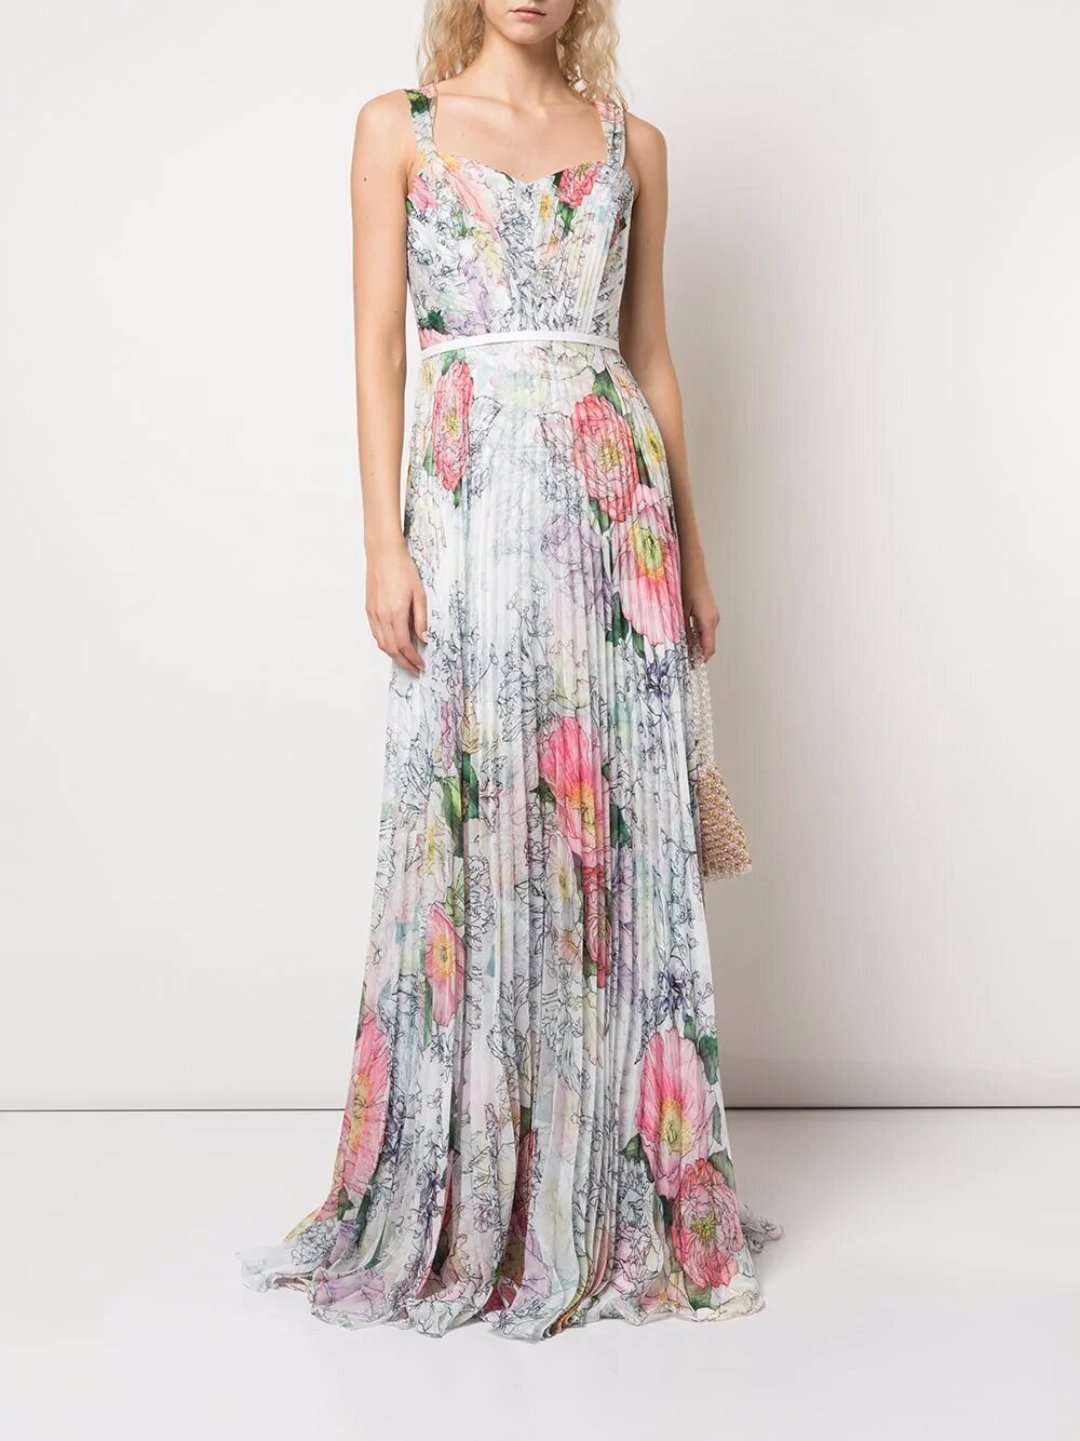 gown floral